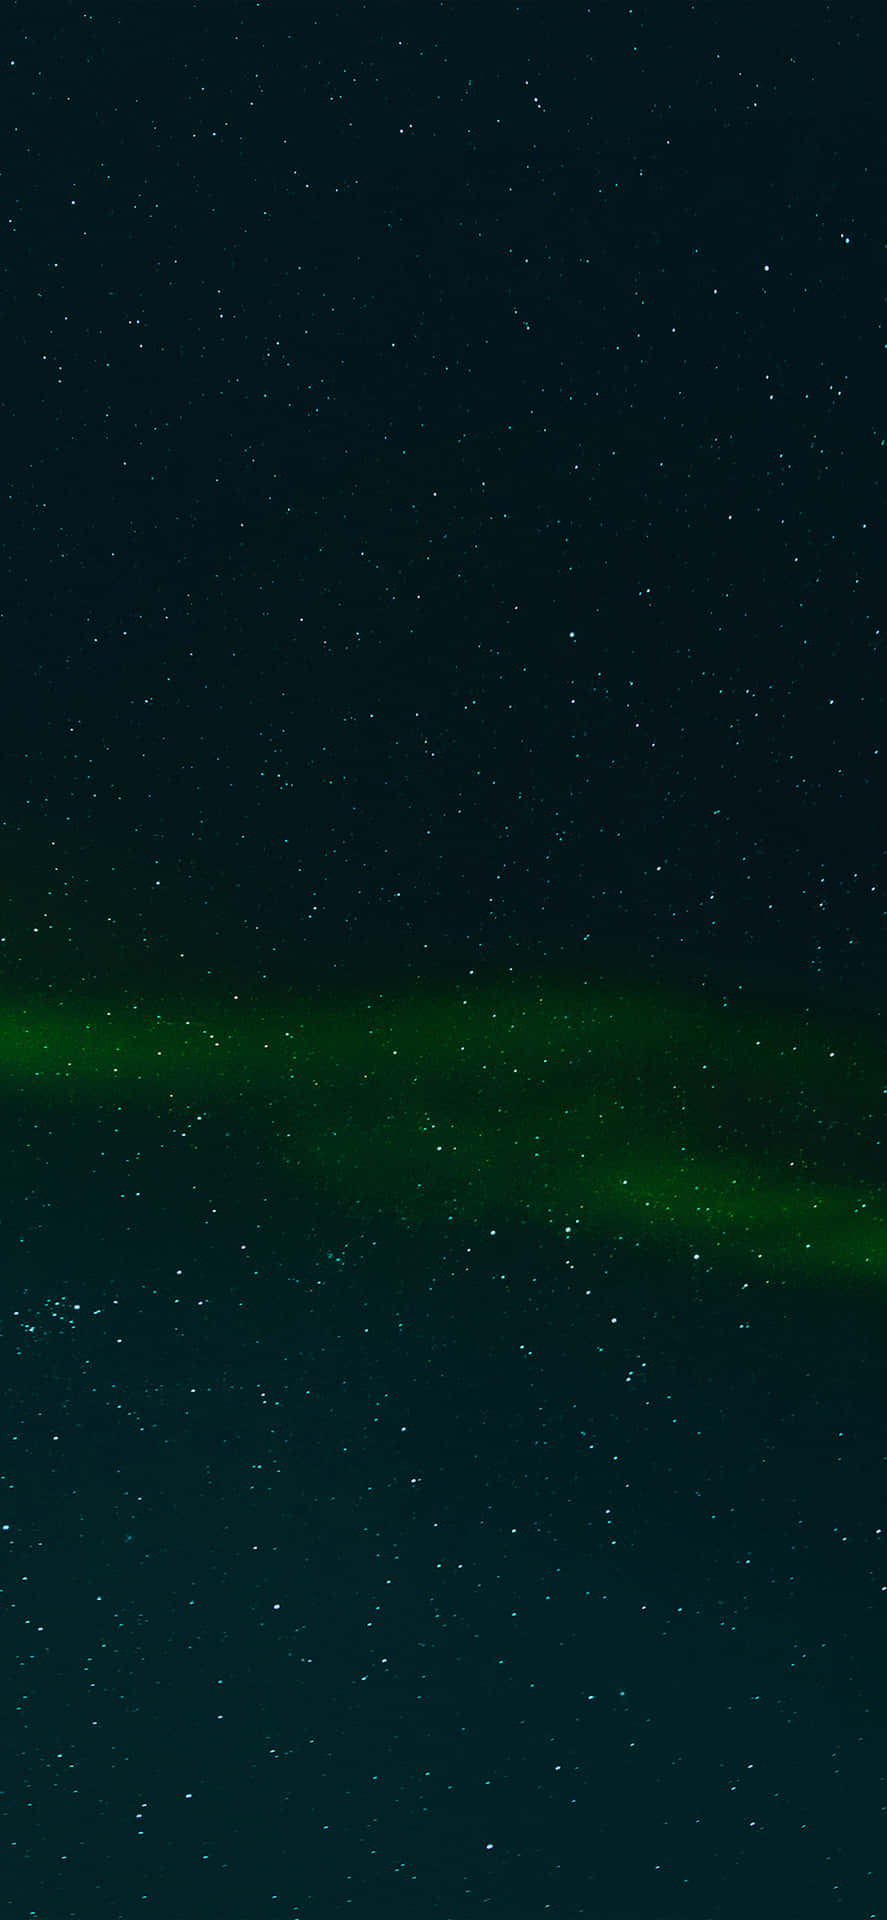 The Aurora Borealis Is Shown In The Sky